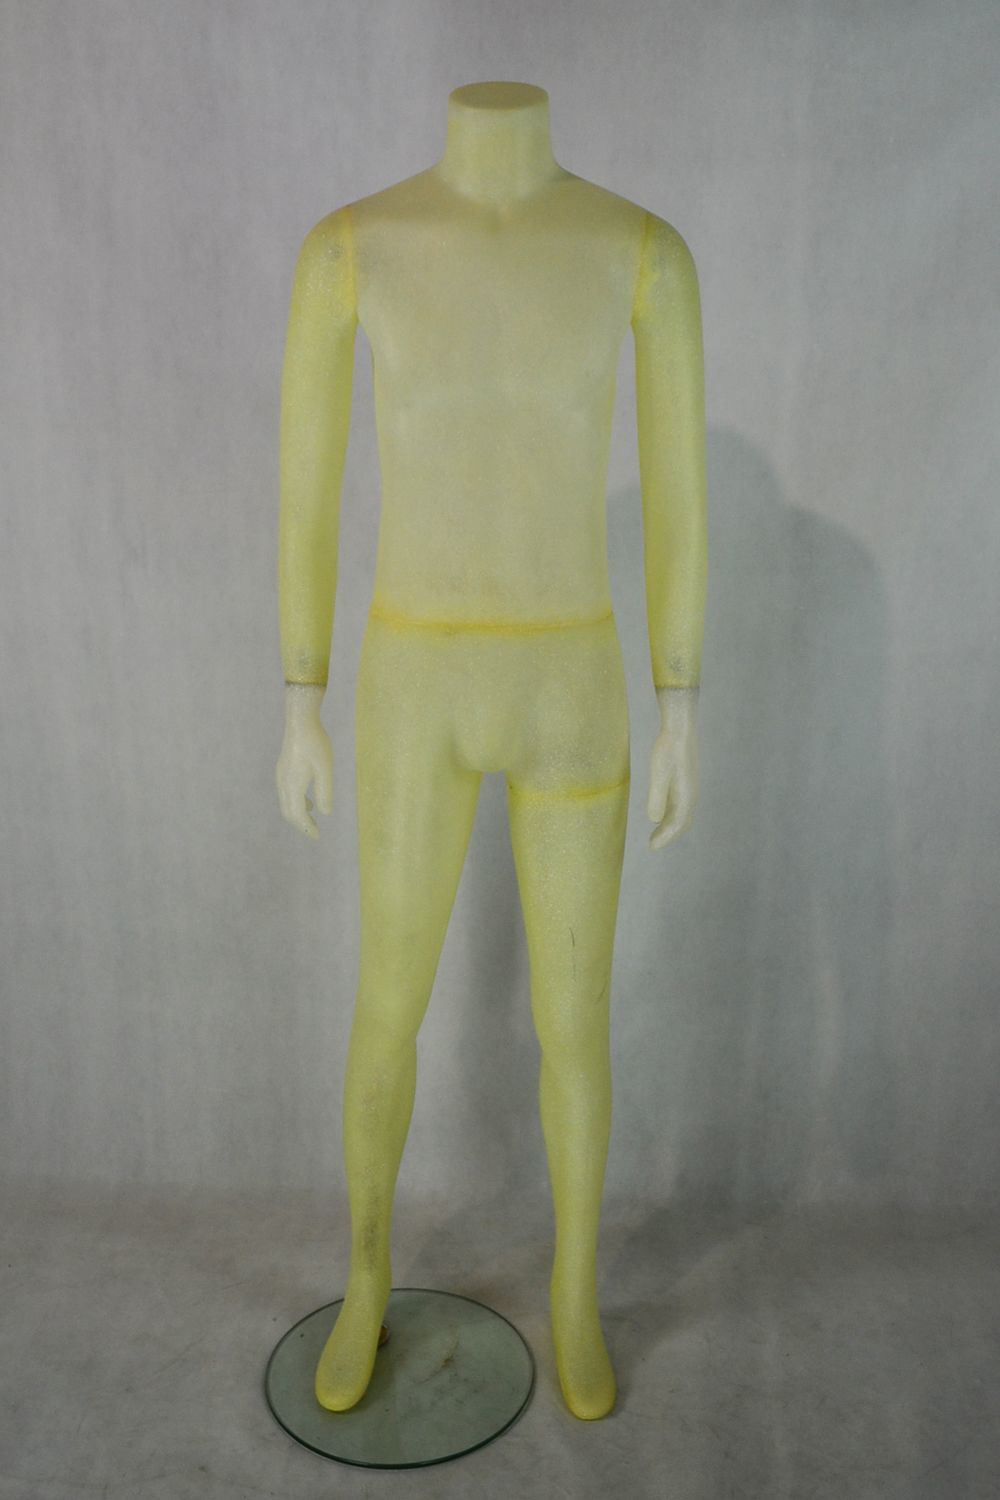 Transparent Male Mannequin Without Head